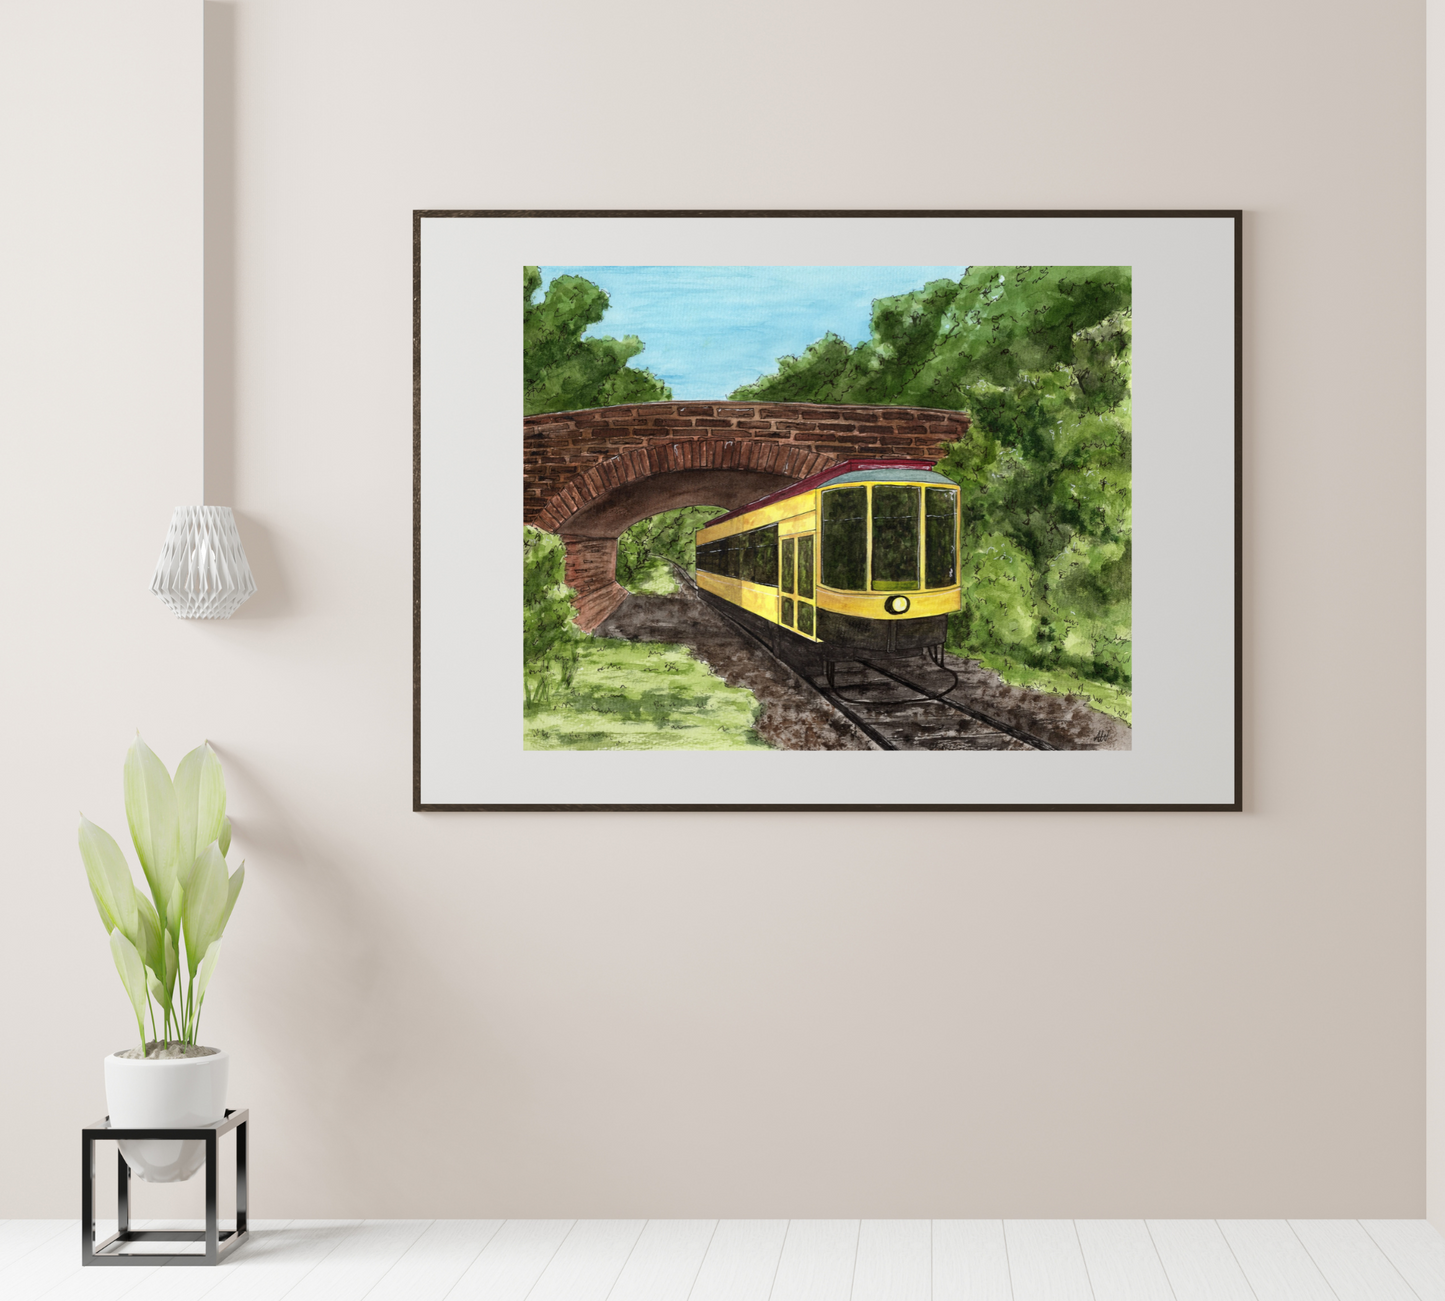 Excelsior Trolley - Pen and Watercolor Art - Archival Quality Art Print